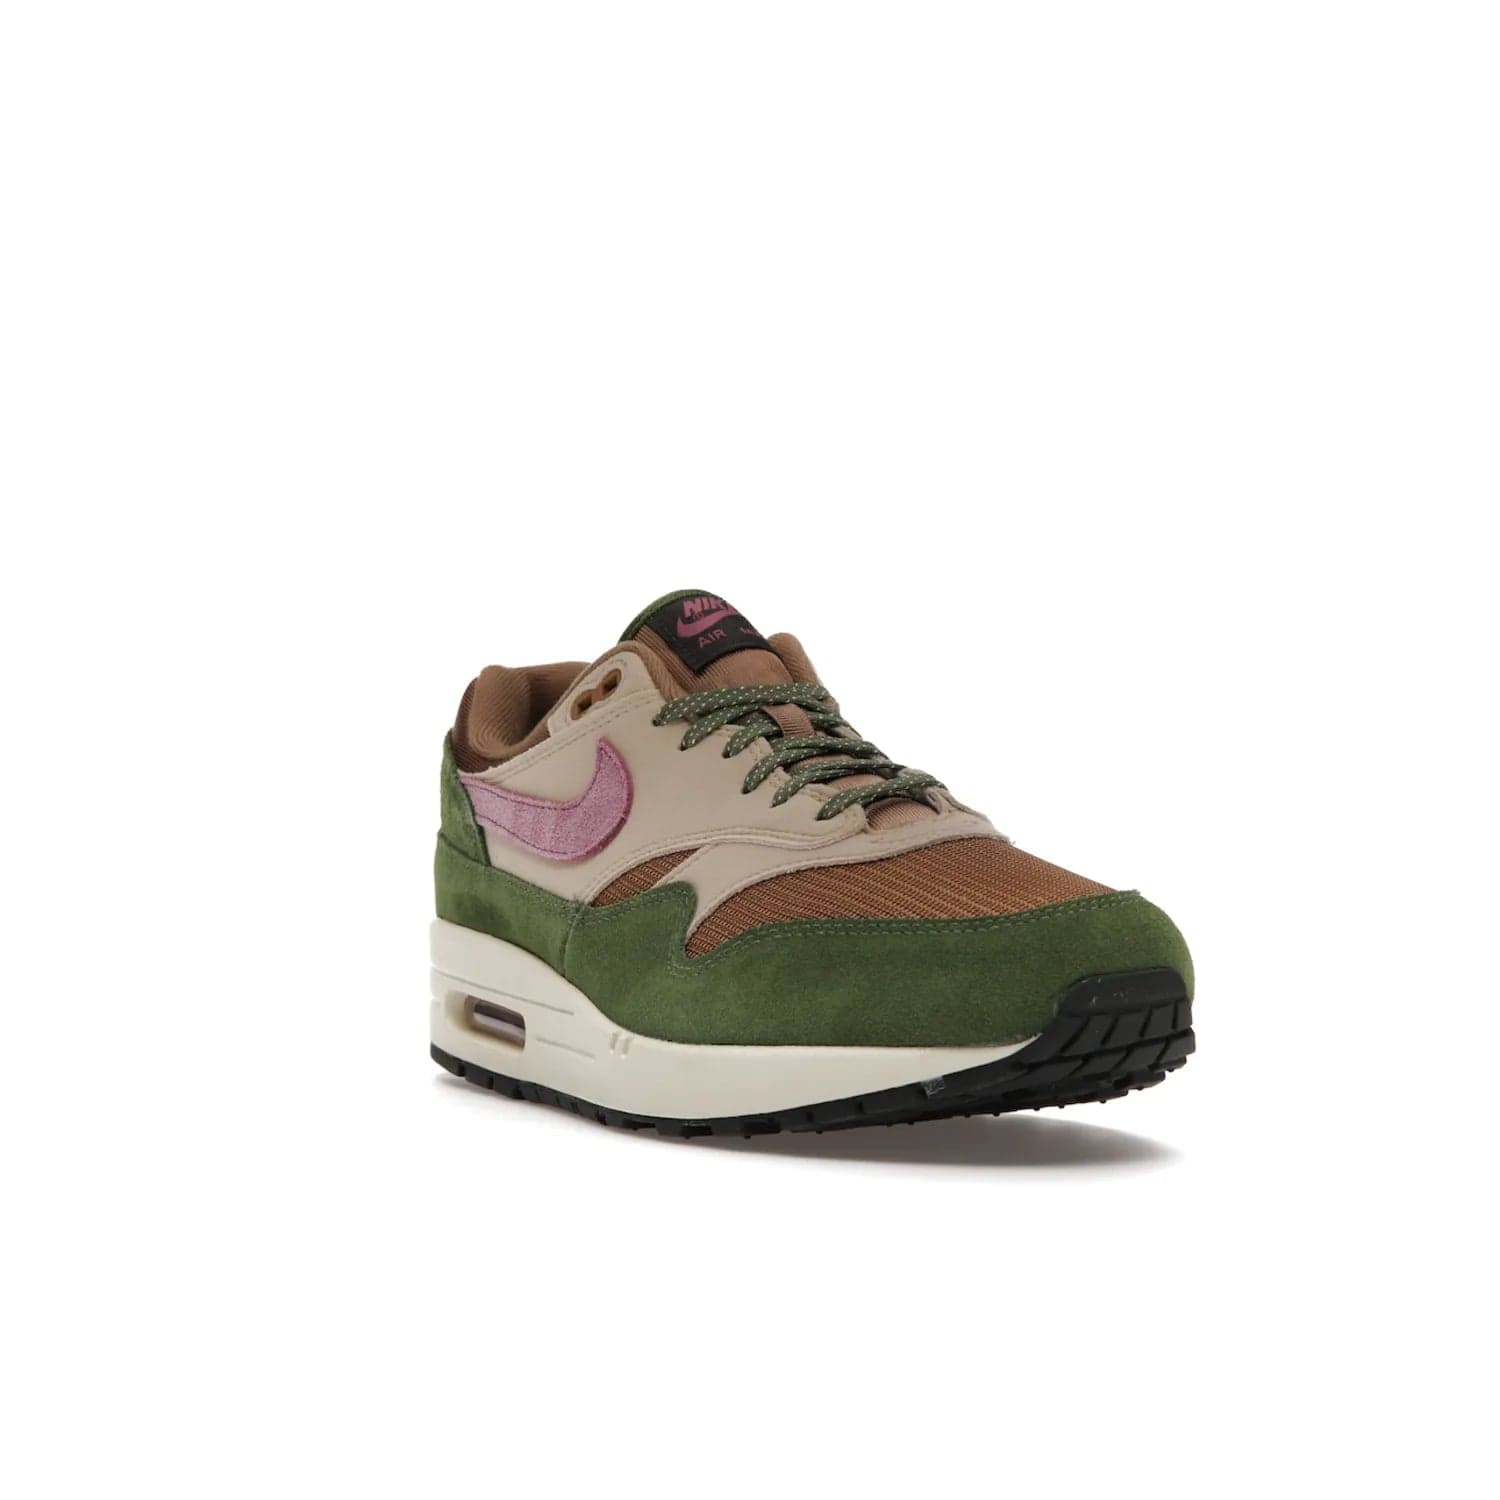 Nike Air Max 1 SH Treeline - Image 7 - Only at www.BallersClubKickz.com - A classic Nike Air Max 1 SH Treeline with a brown mesh upper, taupe Durabuck overlays, and hairy green suede details. Light Bordeaux Swoosh and woven tongue label for a pop of color. Released in May 2022. Perfect for any outfit and sure to impress.